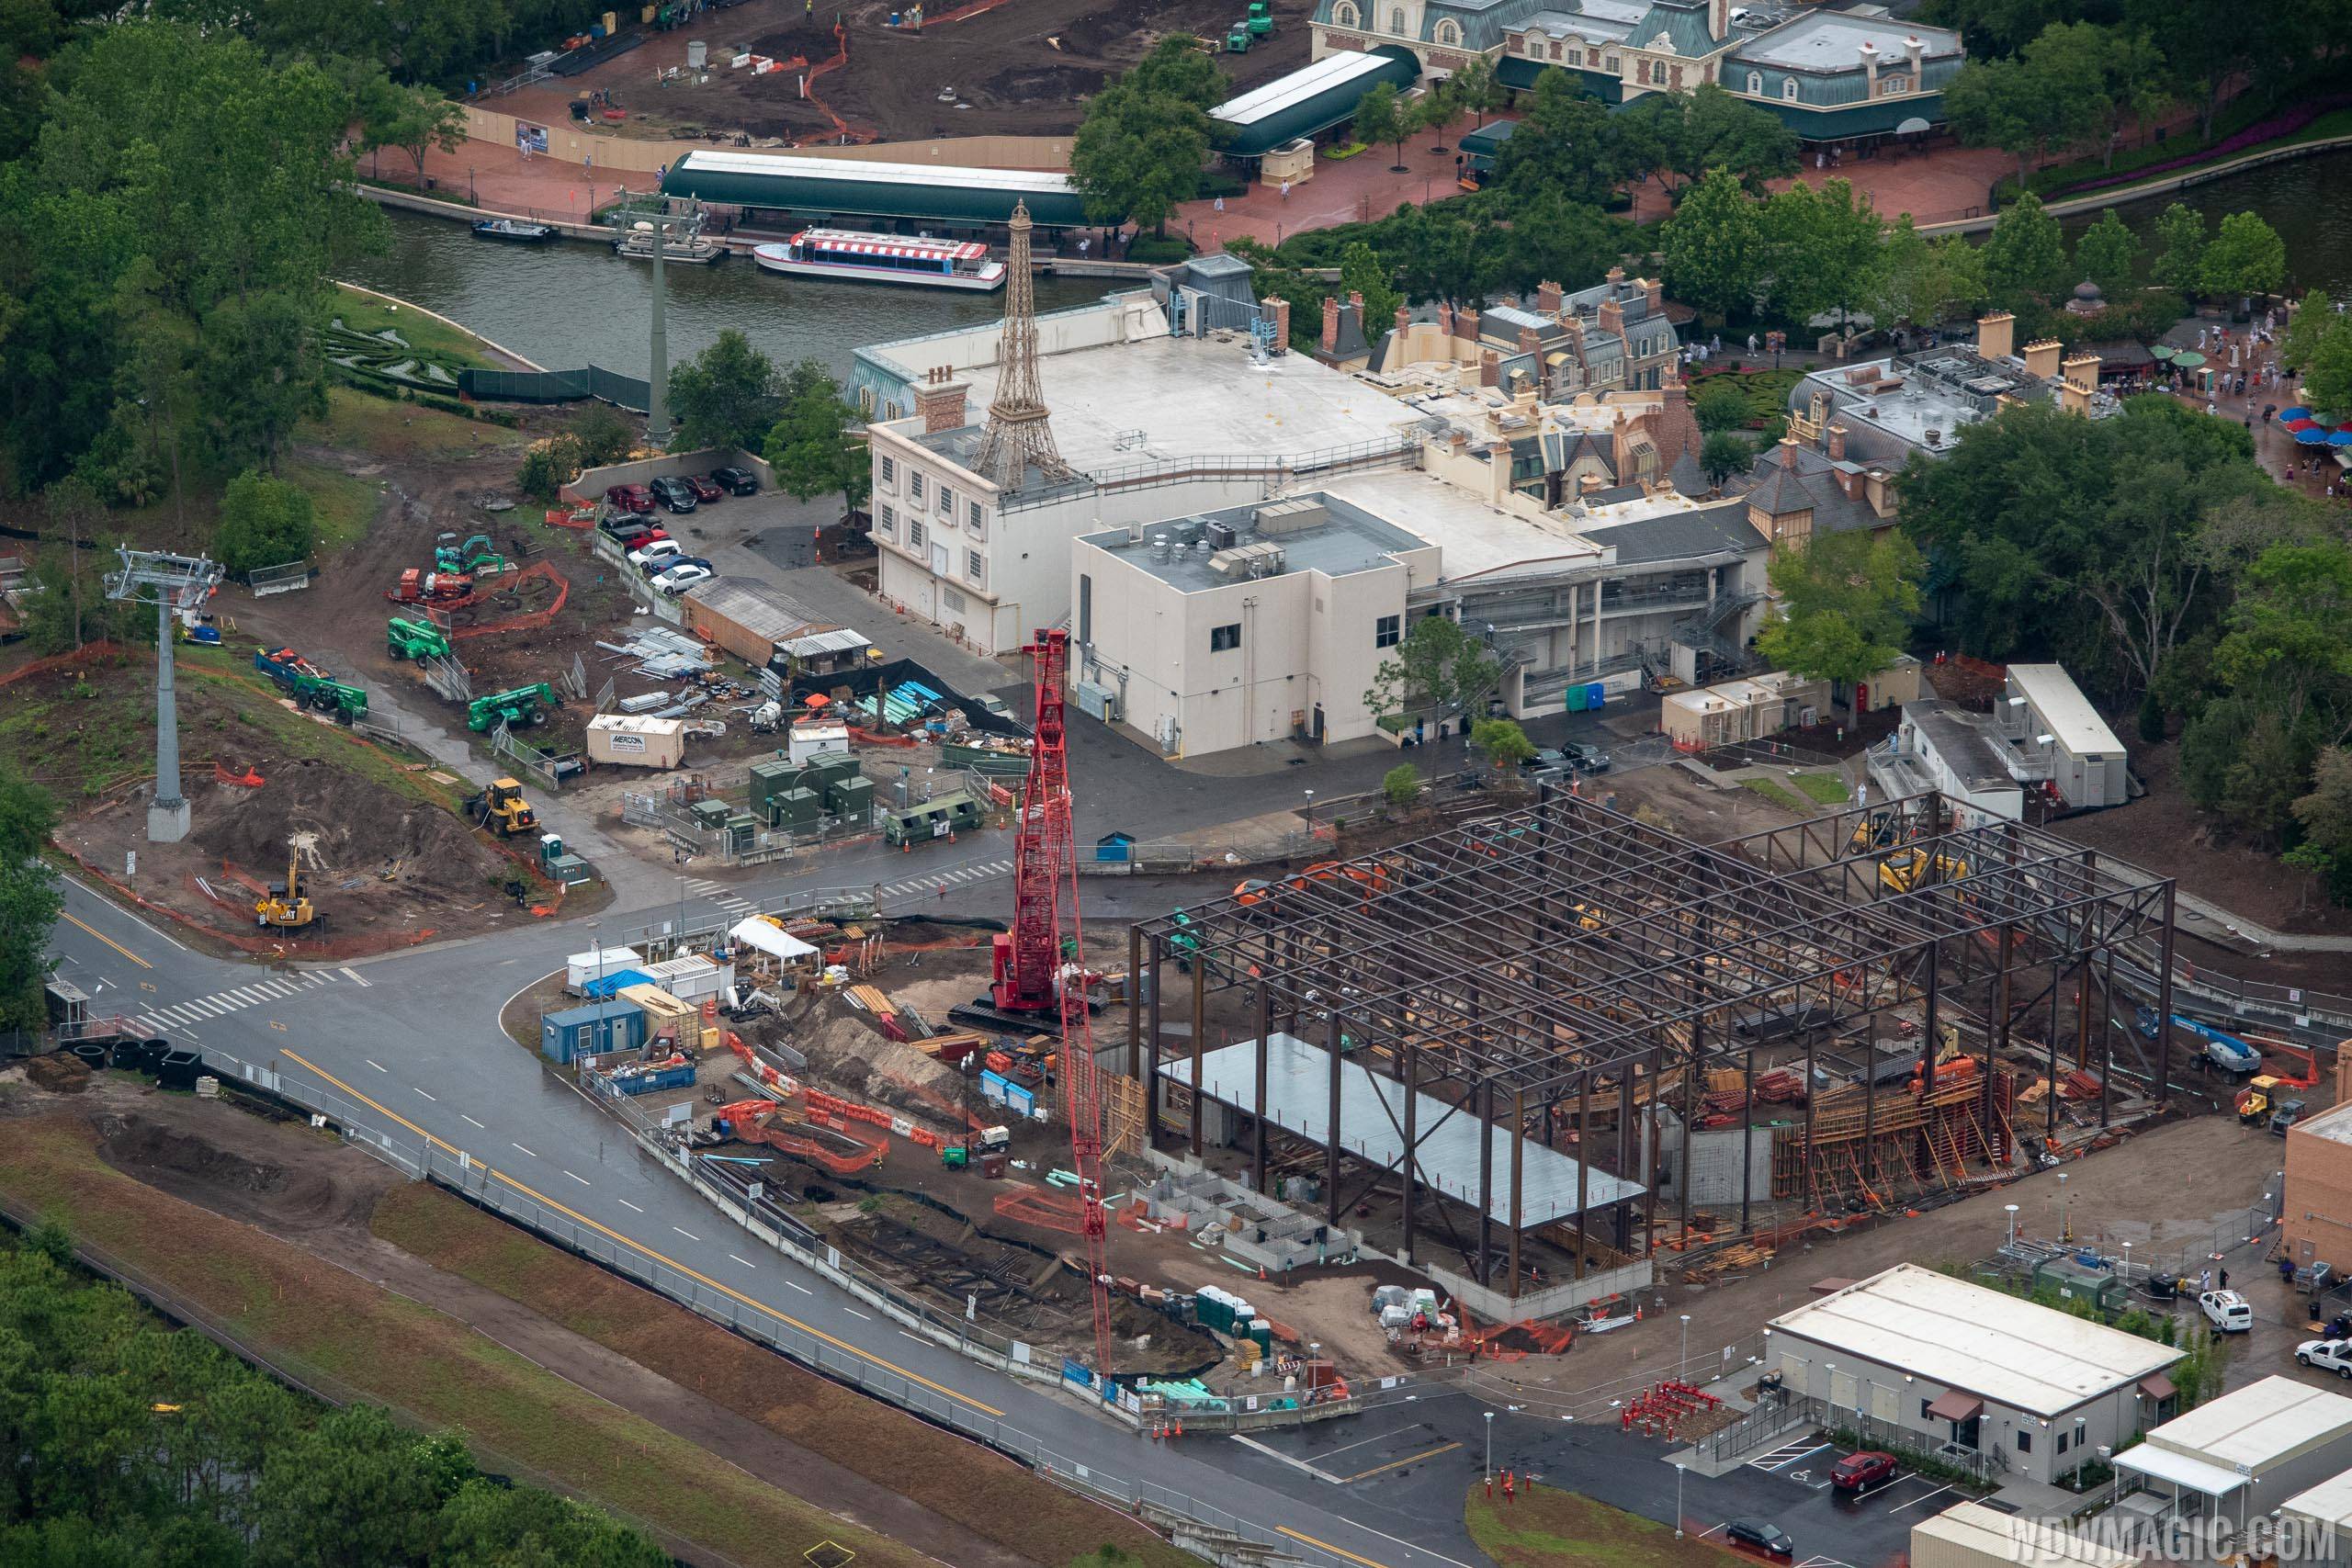 Ratatouille aerial construction pictures - May 2018